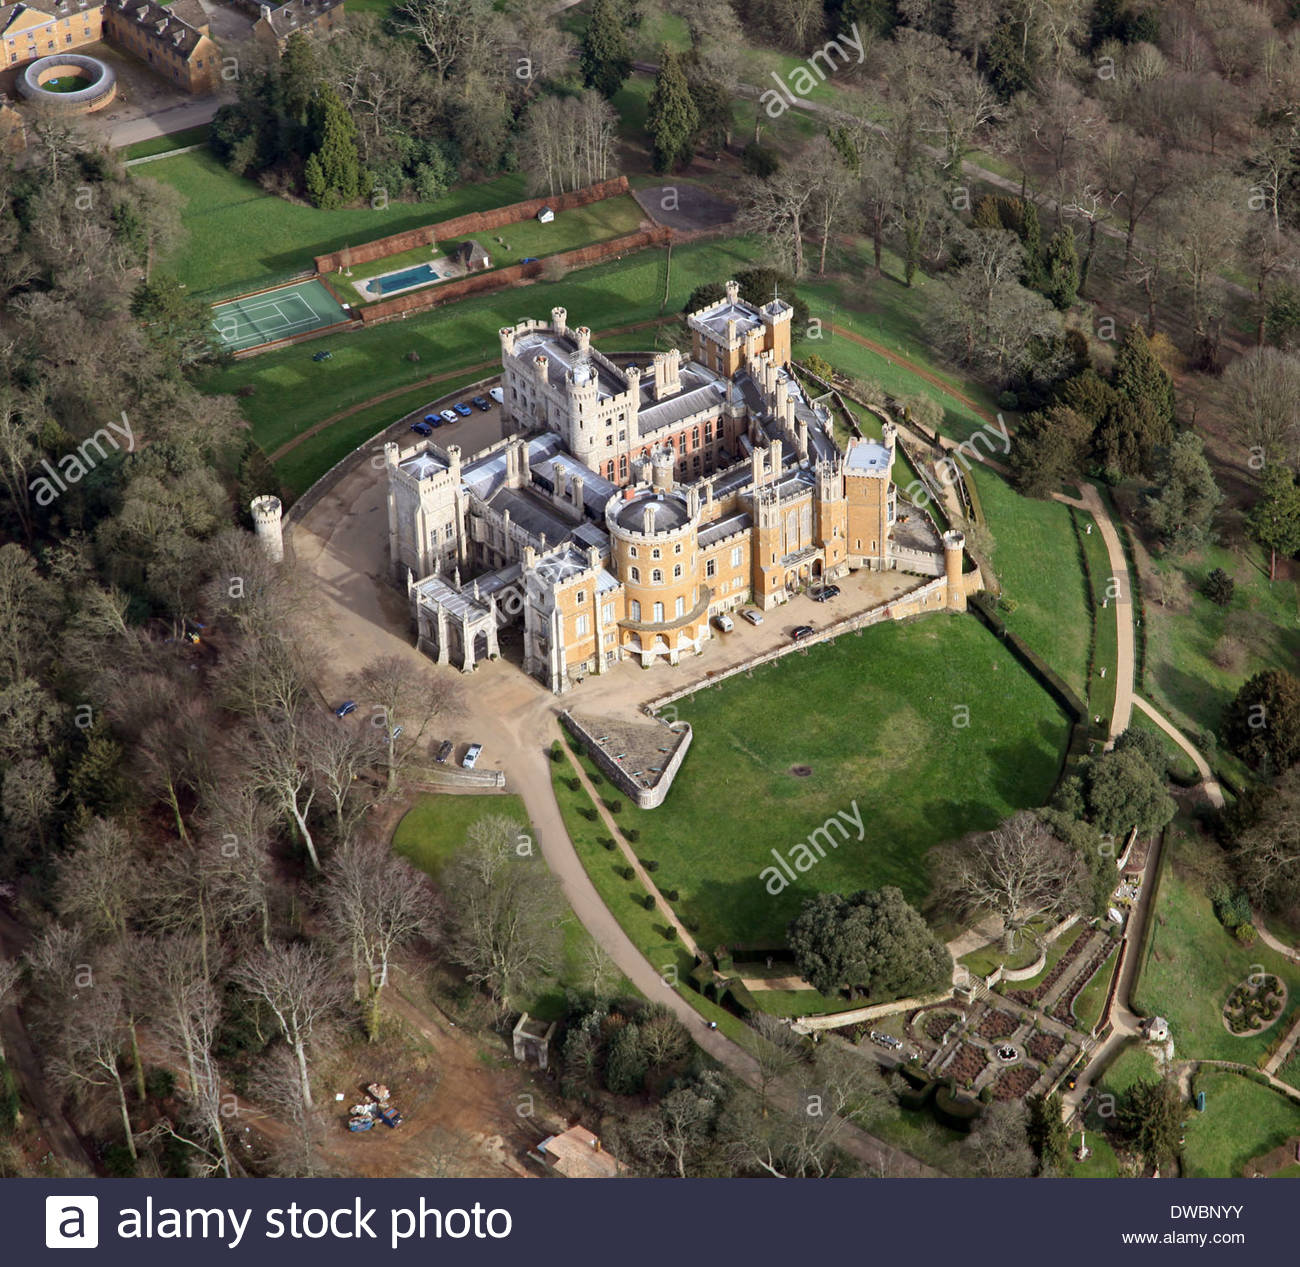 Belvoir Castle High Quality Background on Wallpapers Vista